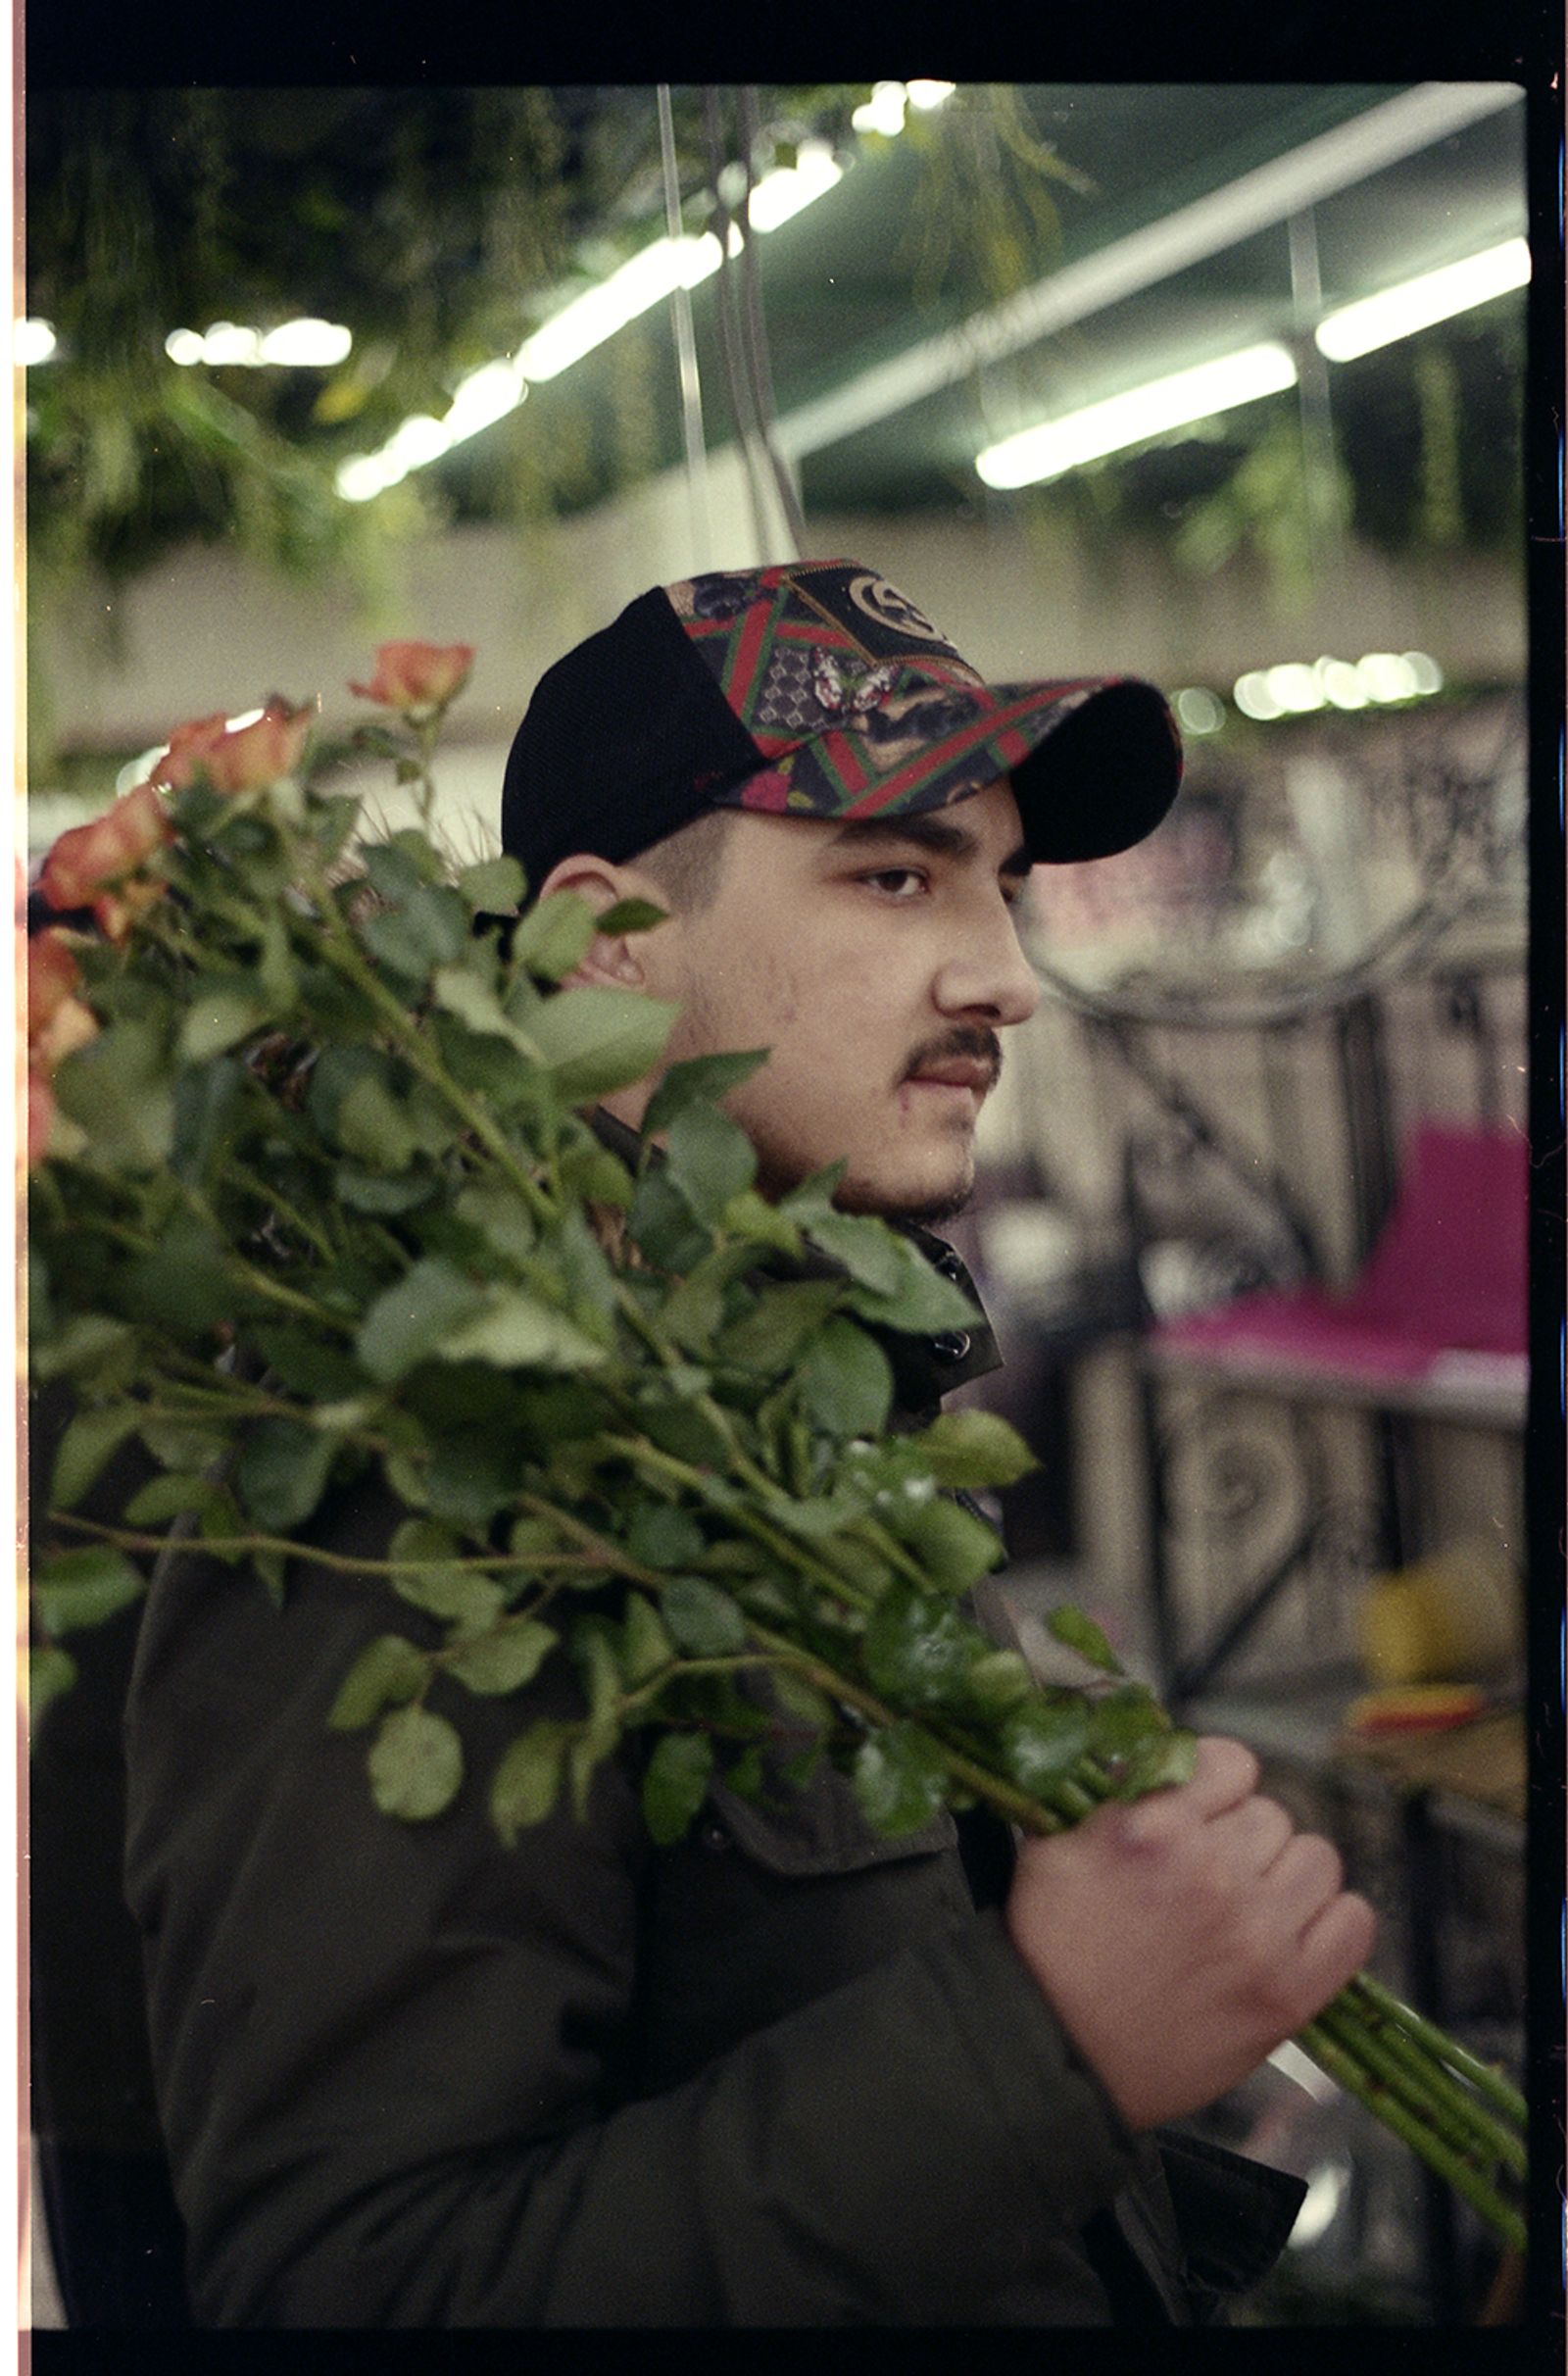 © Denise Lobont - Image from the Flower Sellers photography project